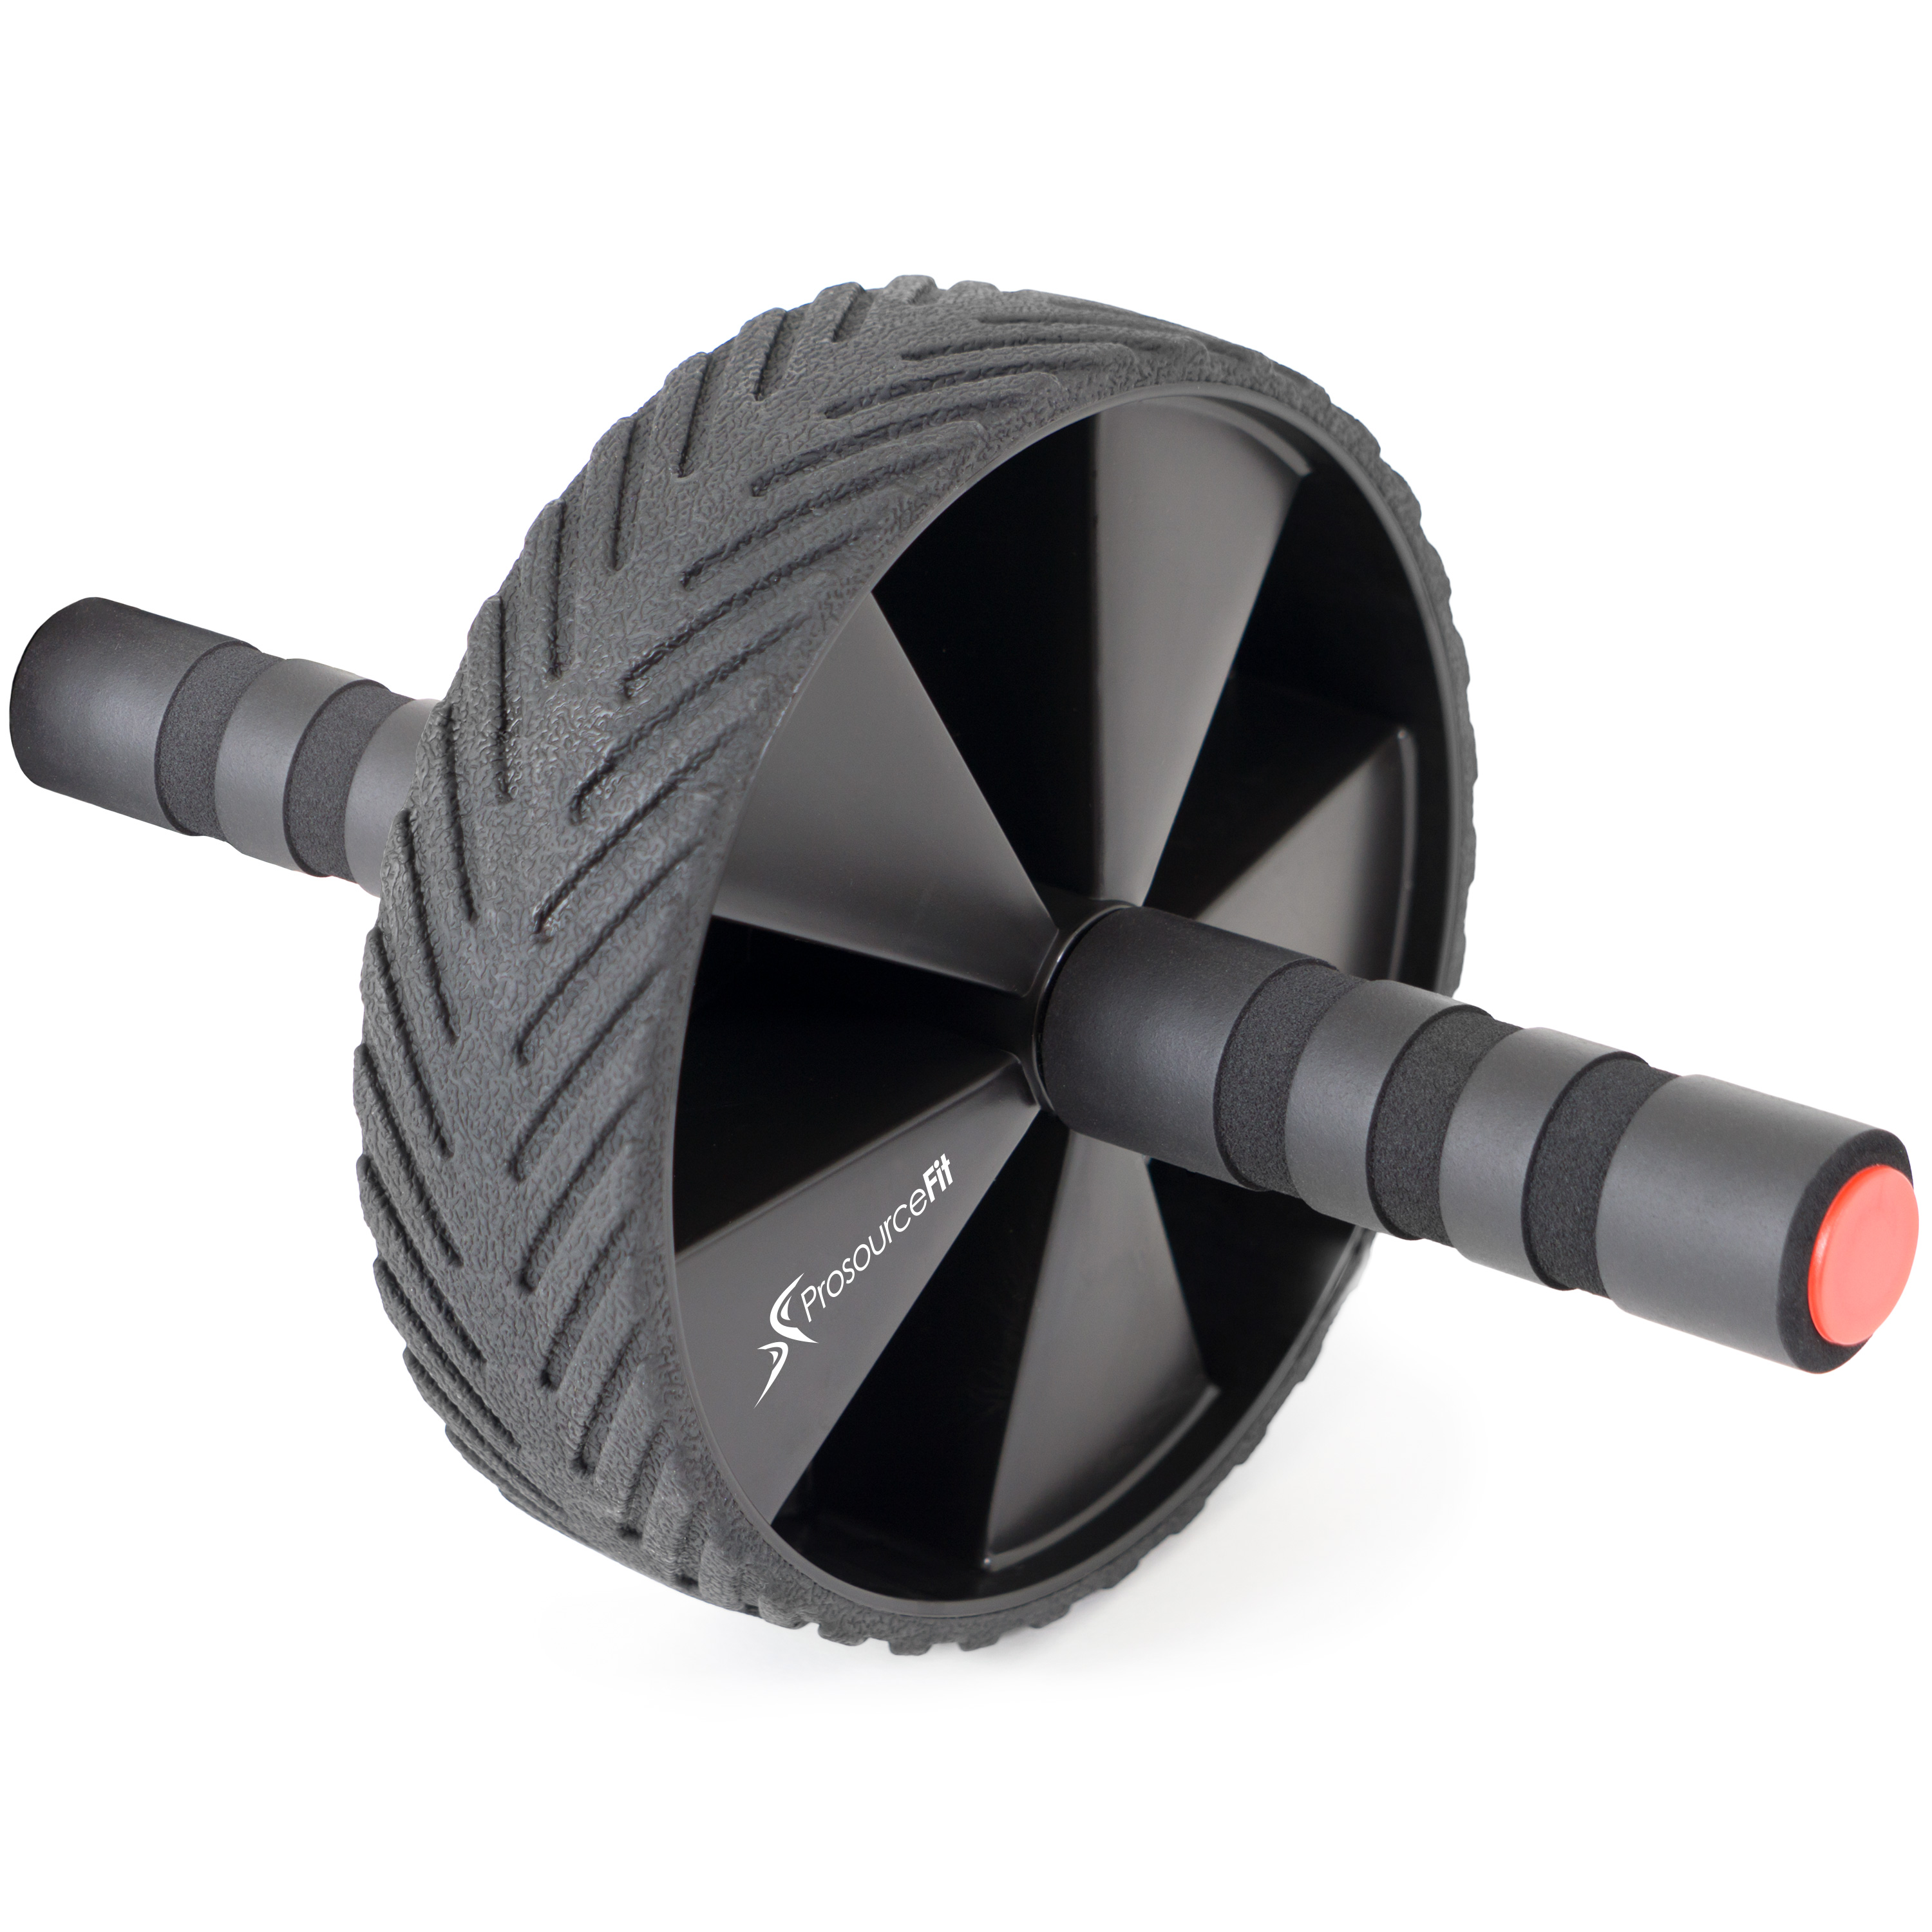 ProsourceFit Ab Wheel Roller Equipment for Abdominal Exercises at Home - image 1 of 5